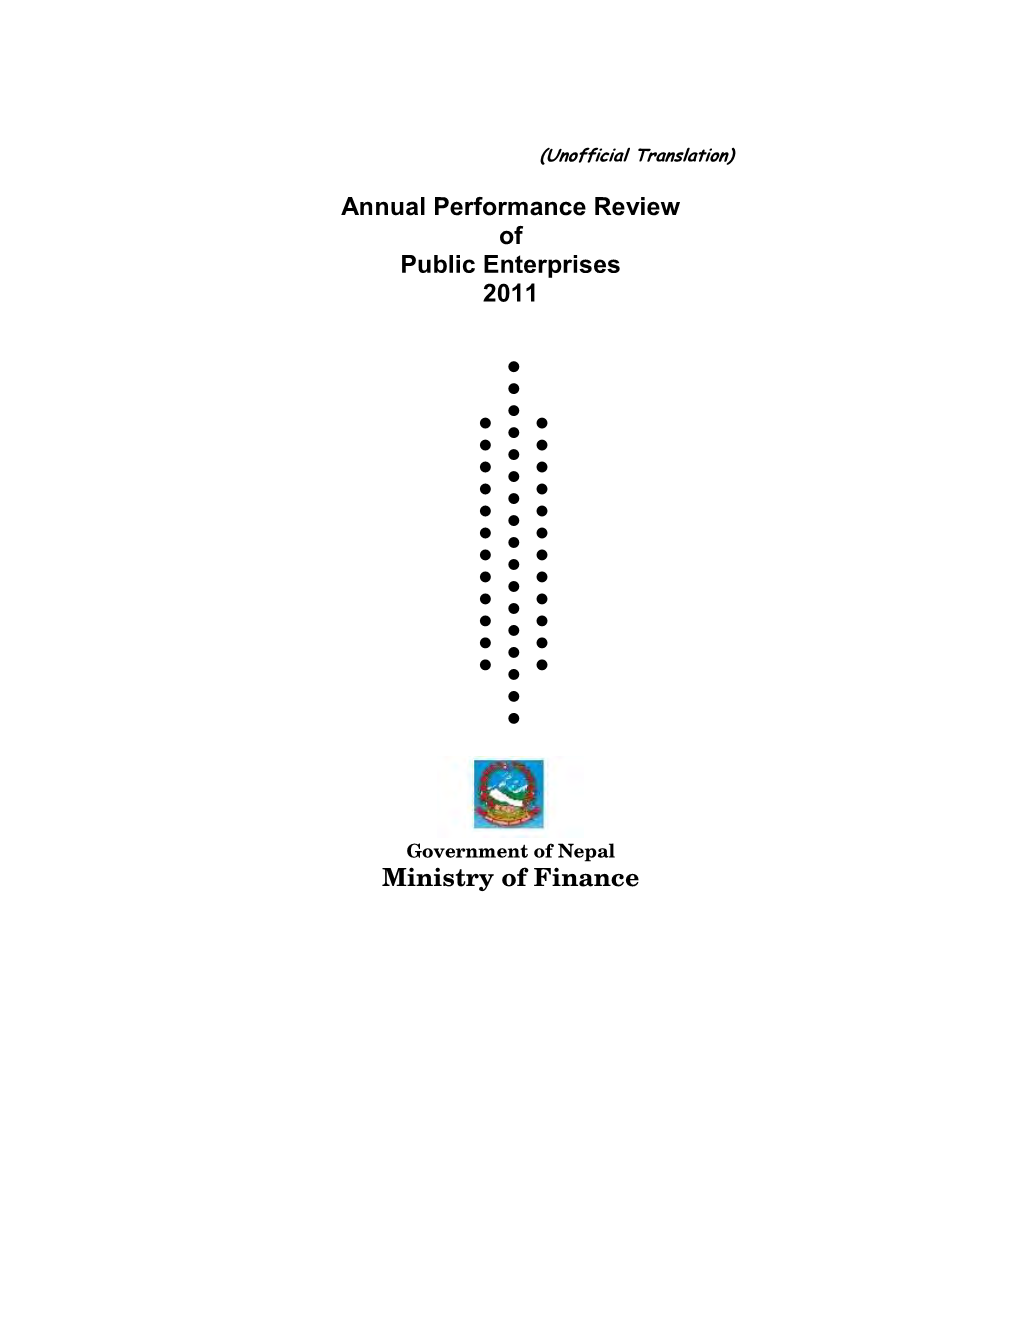 Annual Performance Review of Public Enterprises 2011 Ministry of Finance